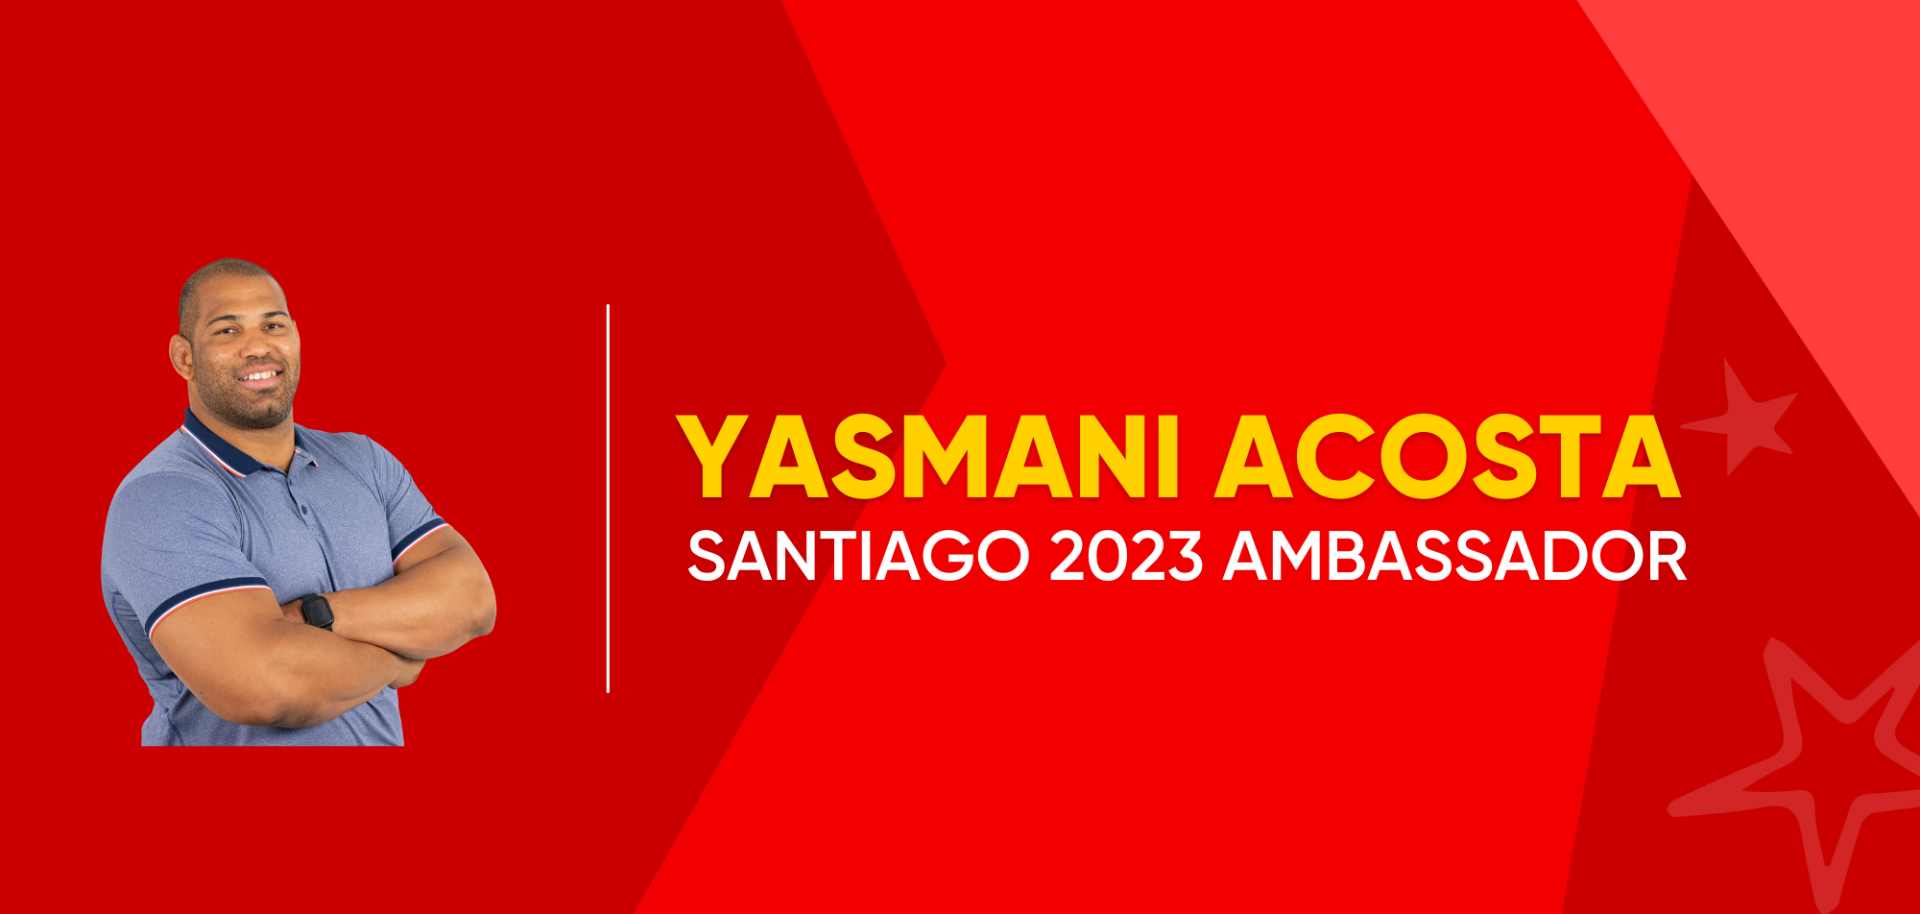 Yasmani Acosta joins the ambassadors team. (Picture from: Santiago 2023).